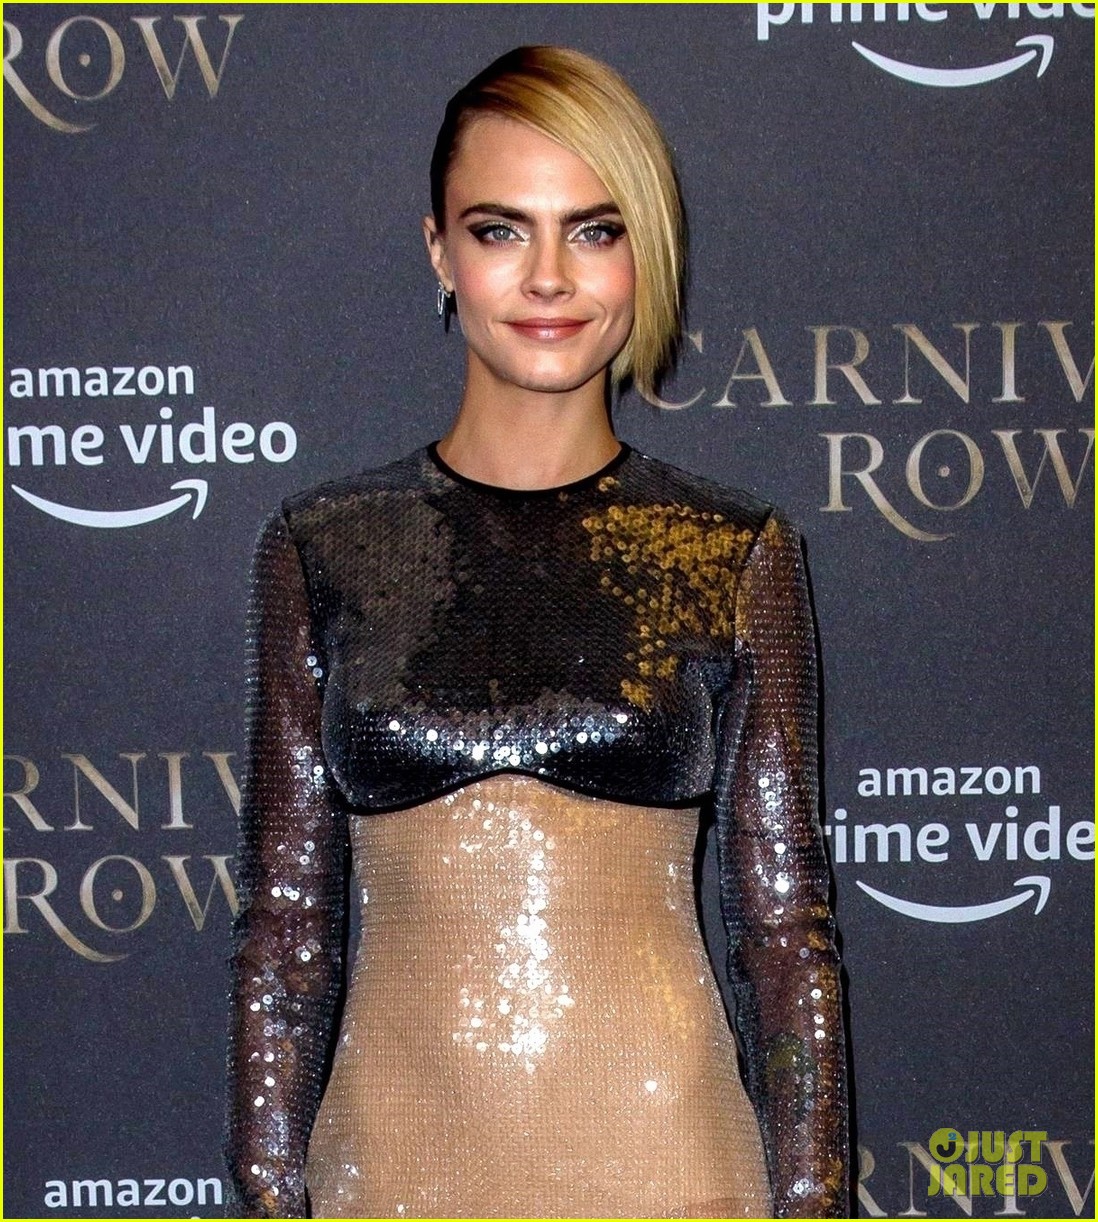 Cara Delevingne Looks Stunning at 'Carnival Row' Premiere in Berlin